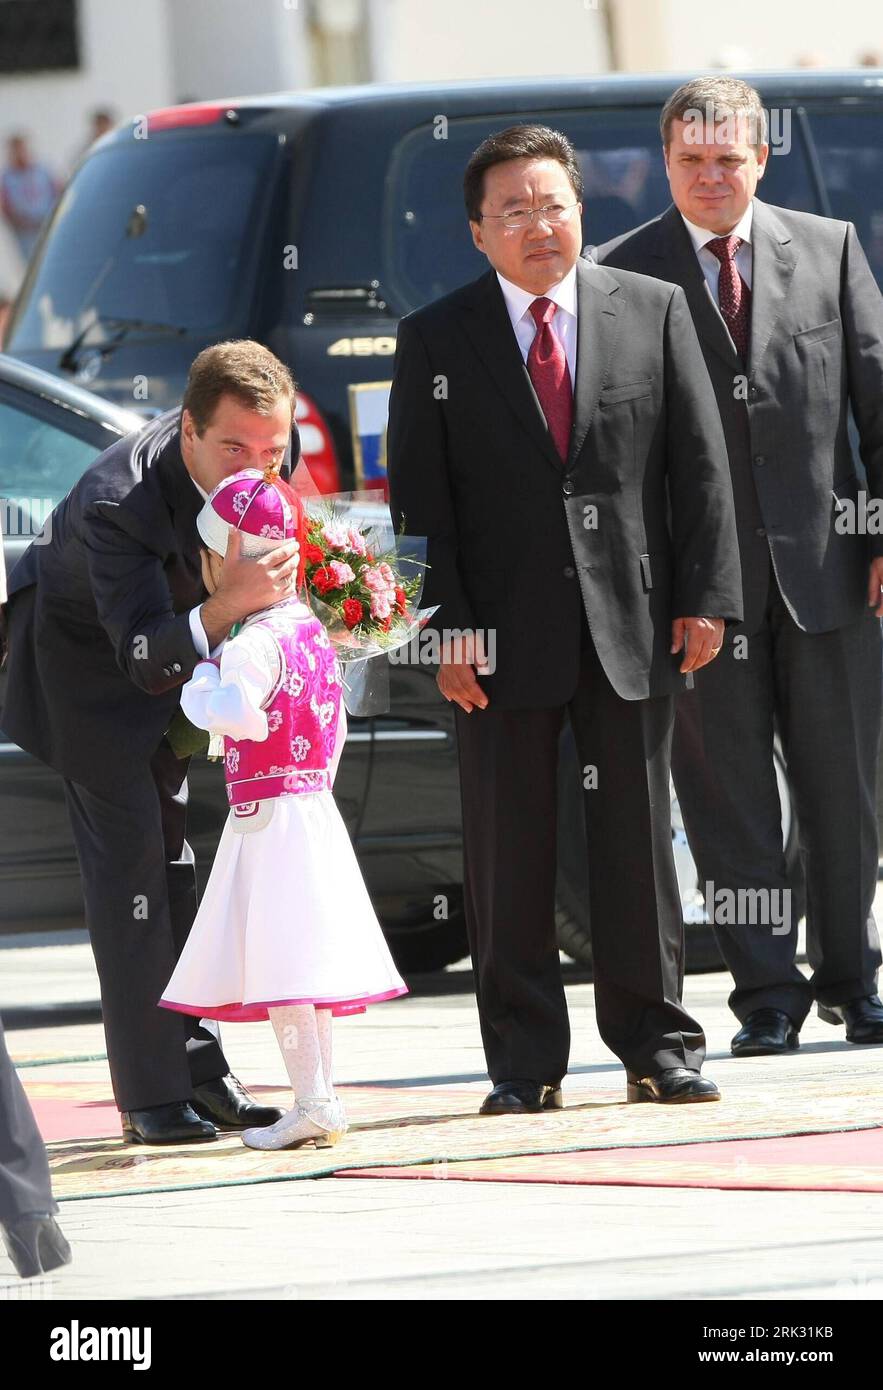 Bildnummer: 53286047  Datum: 25.08.2009  Copyright: imago/Xinhua (090825) -- ULAN BATOR, Aug. 25, 2009 (Xinhua) -- Visiting Russian President Dmitry Medvedev (1st L) kisses a Mongolian girl while Mongolian President Tsakhia Elbegdorj (R, Front) stands by during a welcoming ceremony in Ulan Bator, capital of Mongolia, on Aug. 25, 2009. Medvedev pays an official visit to Mongolia on Aug. 25 to 26. (Xinhua/Hao Lifeng) (lr) (6)MONGOLIA-ULAN BATOR-RUSSIA-MEDVEDEV-VISIT PUBLICATIONxNOTxINxCHN People kbdig xmk 2009 hoch  o0 Politik    Bildnummer 53286047 Date 25 08 2009 Copyright Imago XINHUA  Ulan B Stock Photo